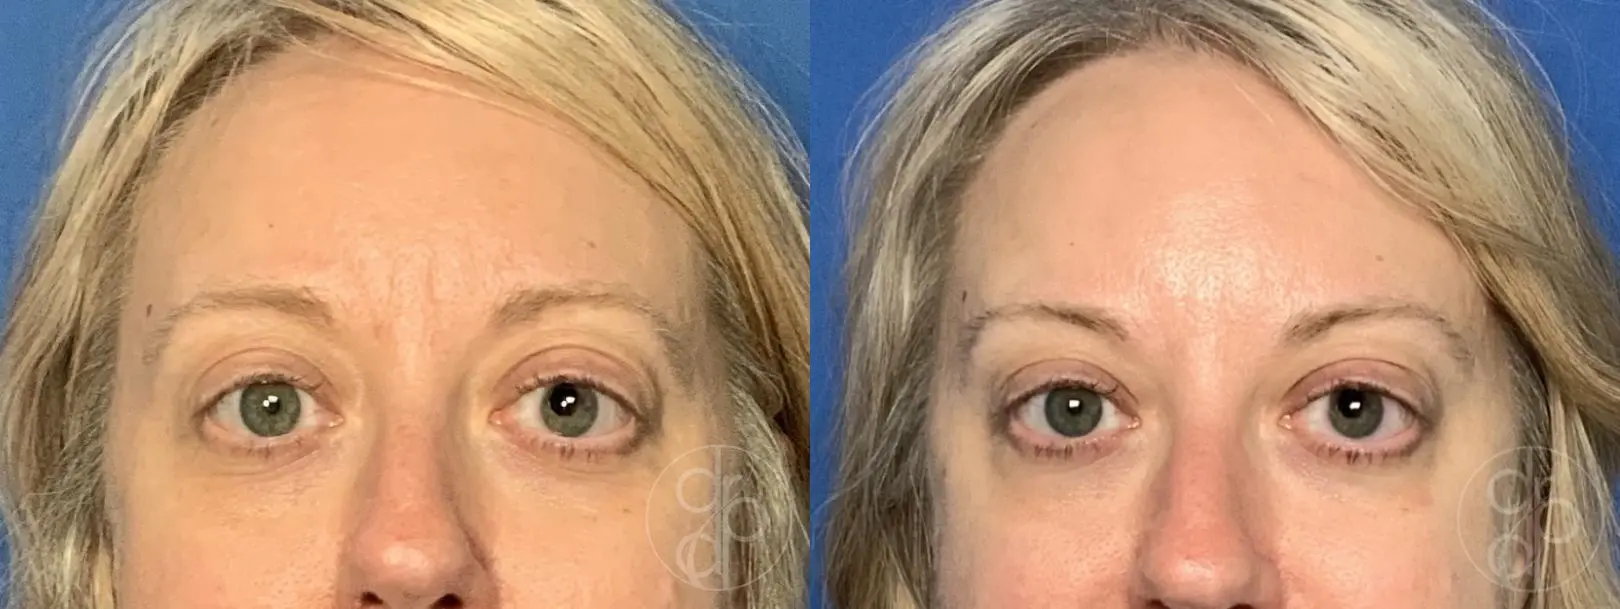 patient 14169 injectables before and after result - Before and After 1